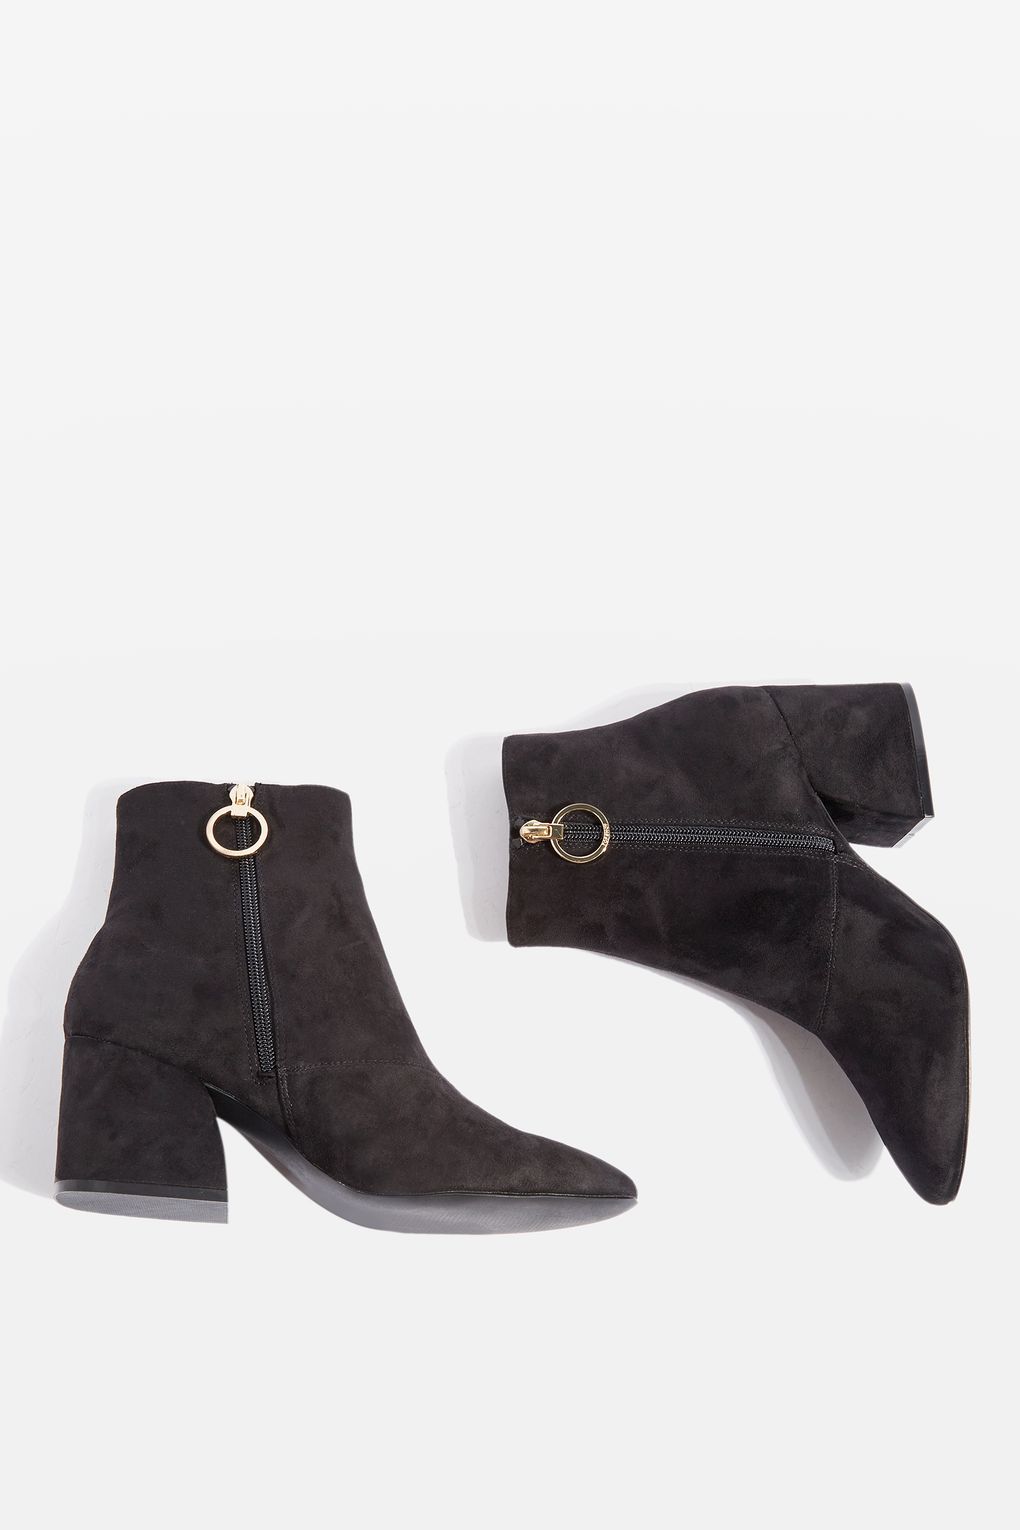 topshop suede ankle boots